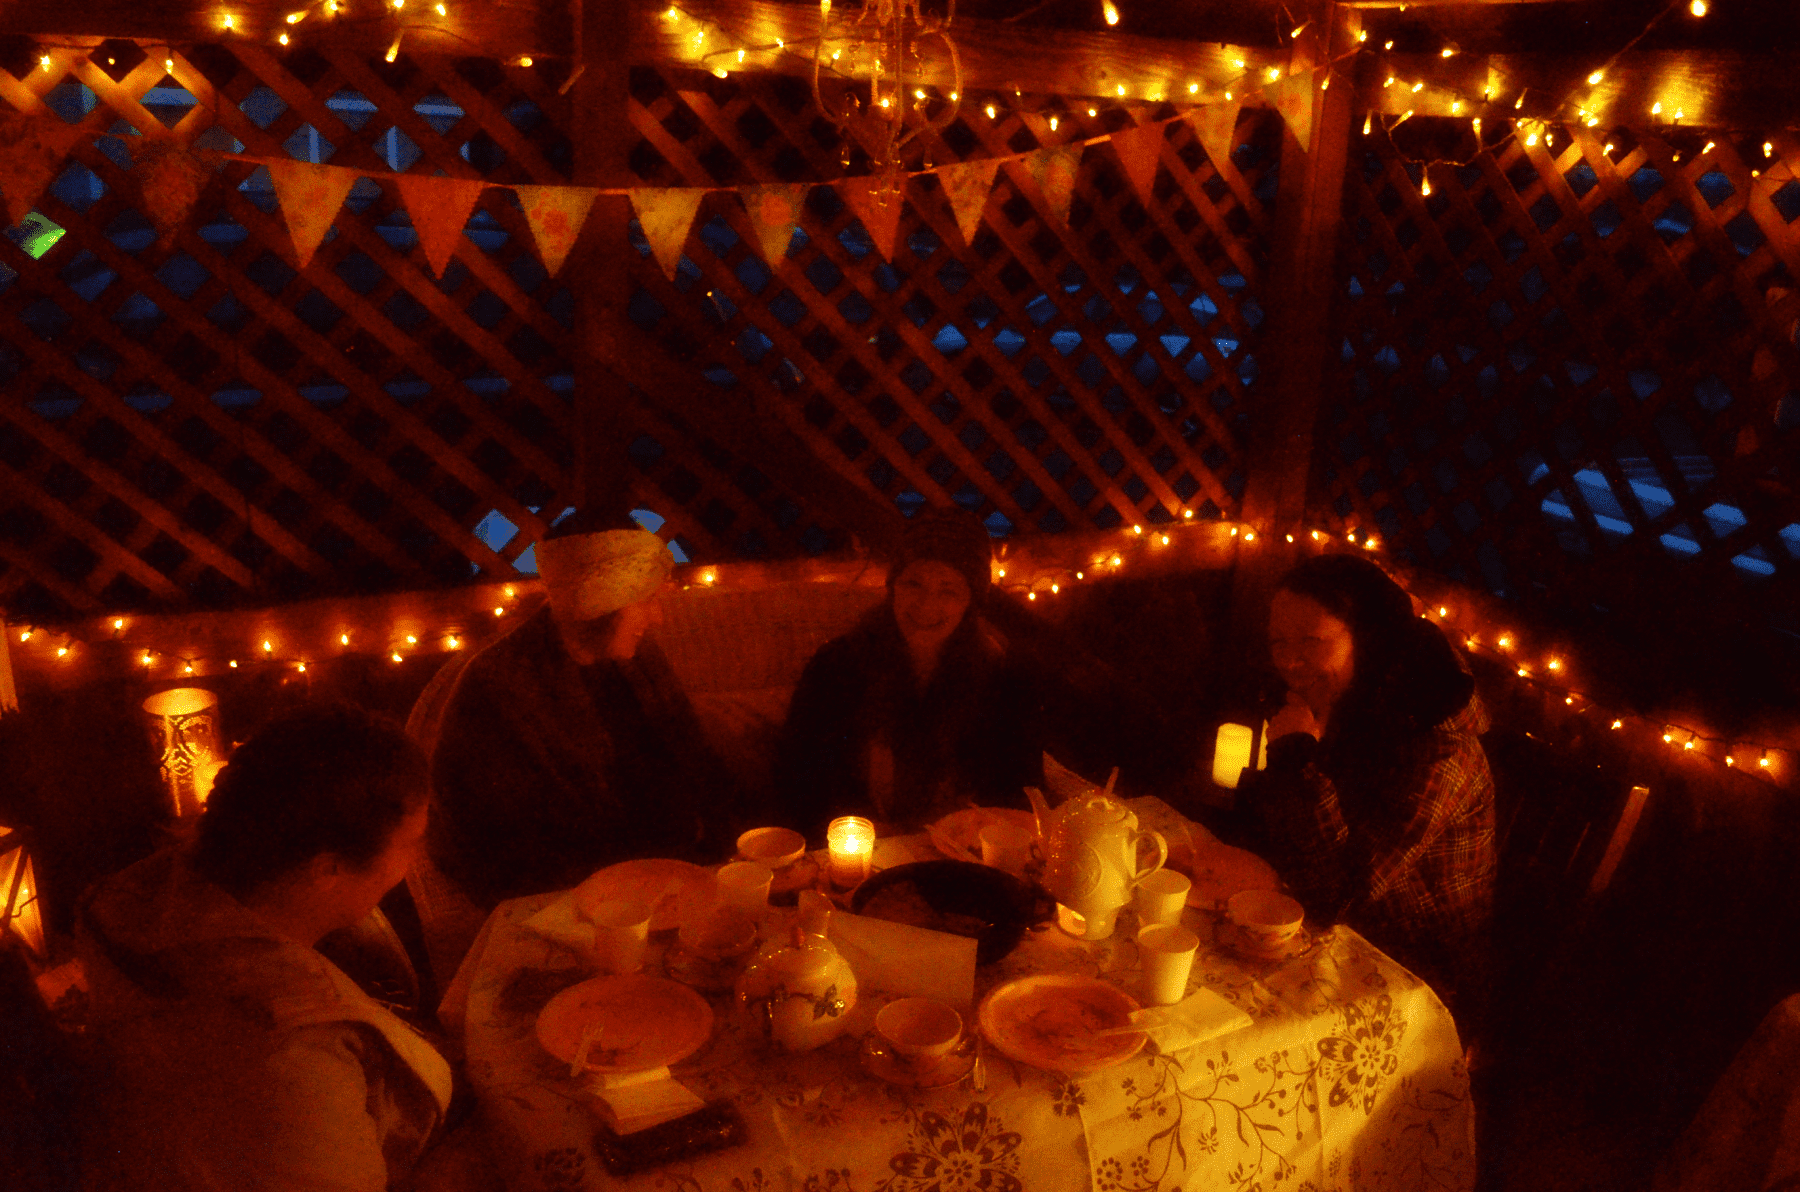 Ladies laugh around a table drinking tea under acanopy of twinkling lights